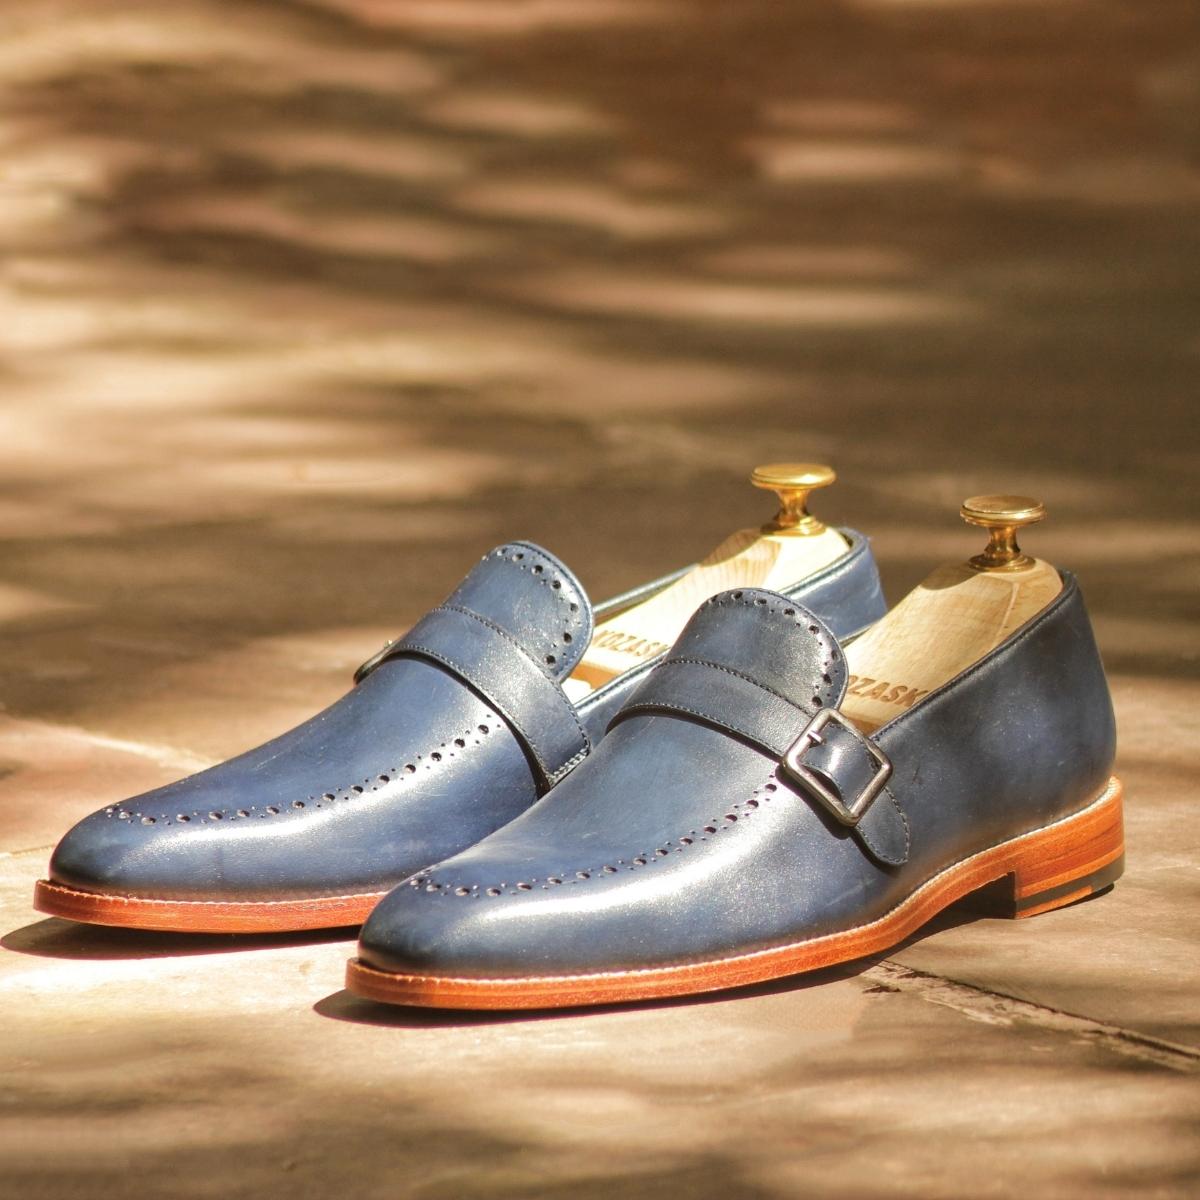 Blake Stitched Navy leather Strap loafer with brogues